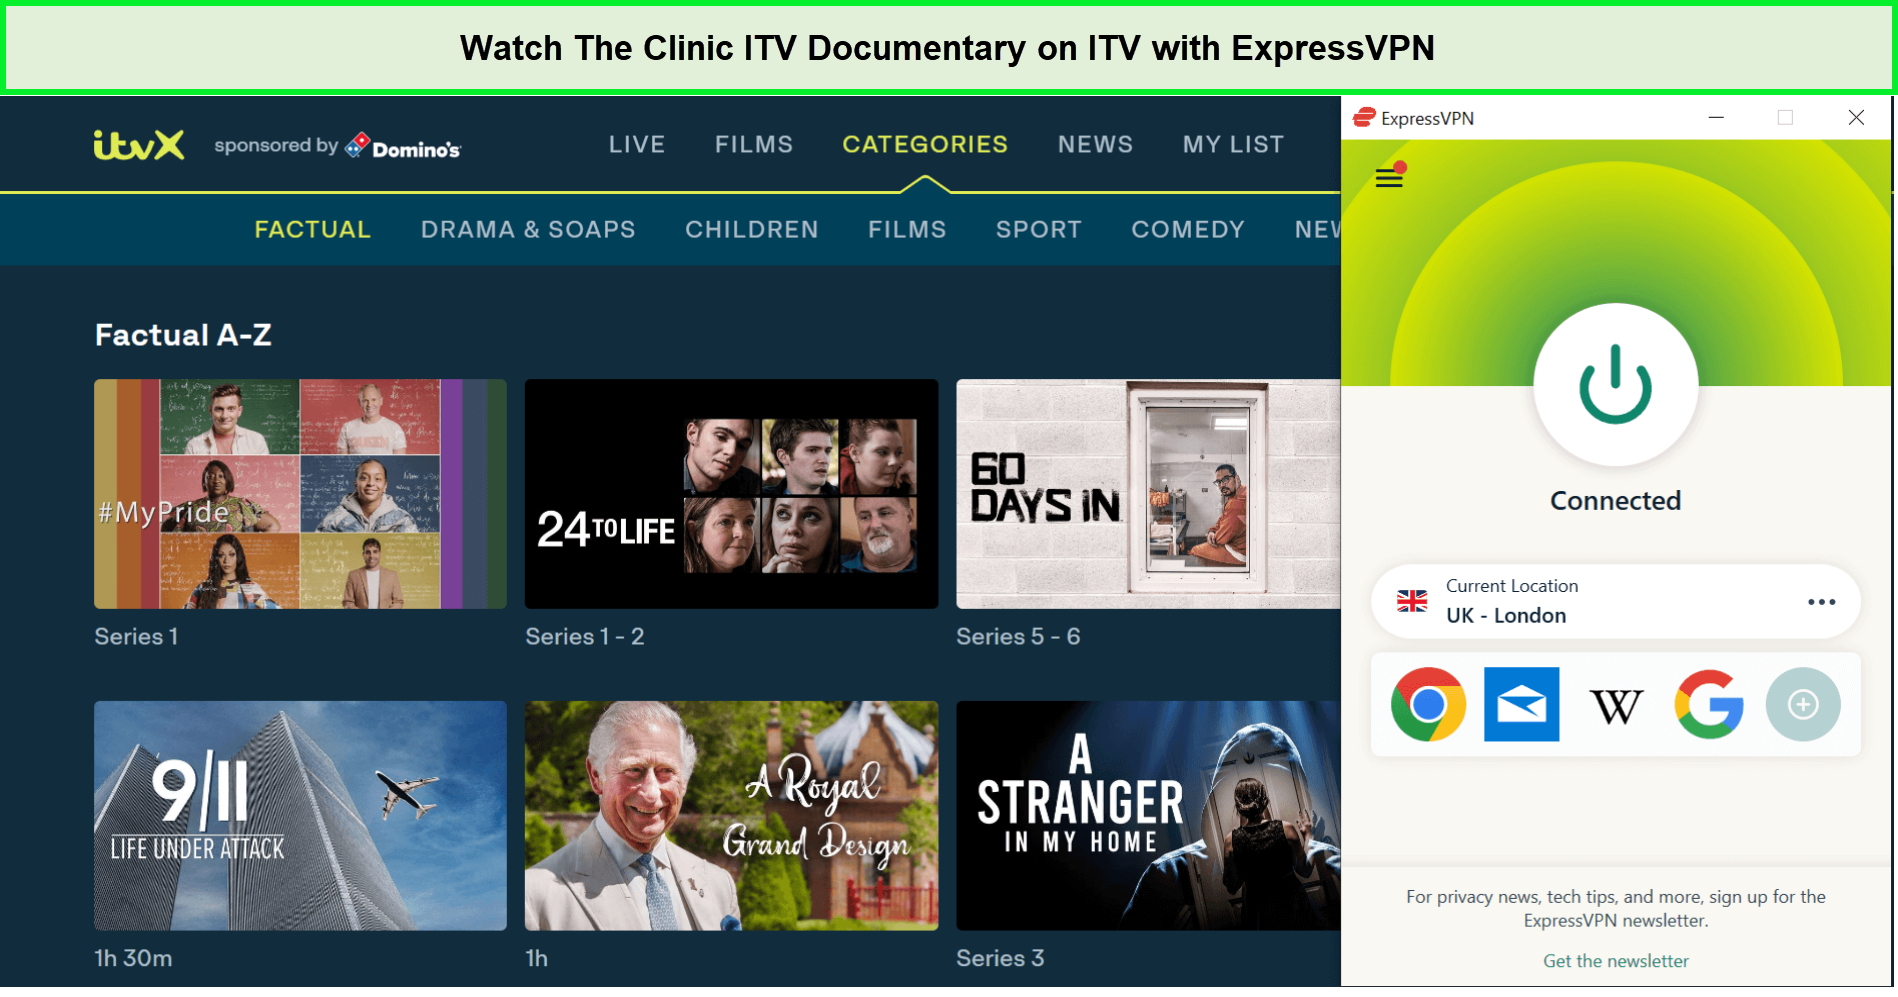 Watch-The-Clinic-ITV-Documentary-in-New Zealand-on-ITV-with-ExpressVPN.